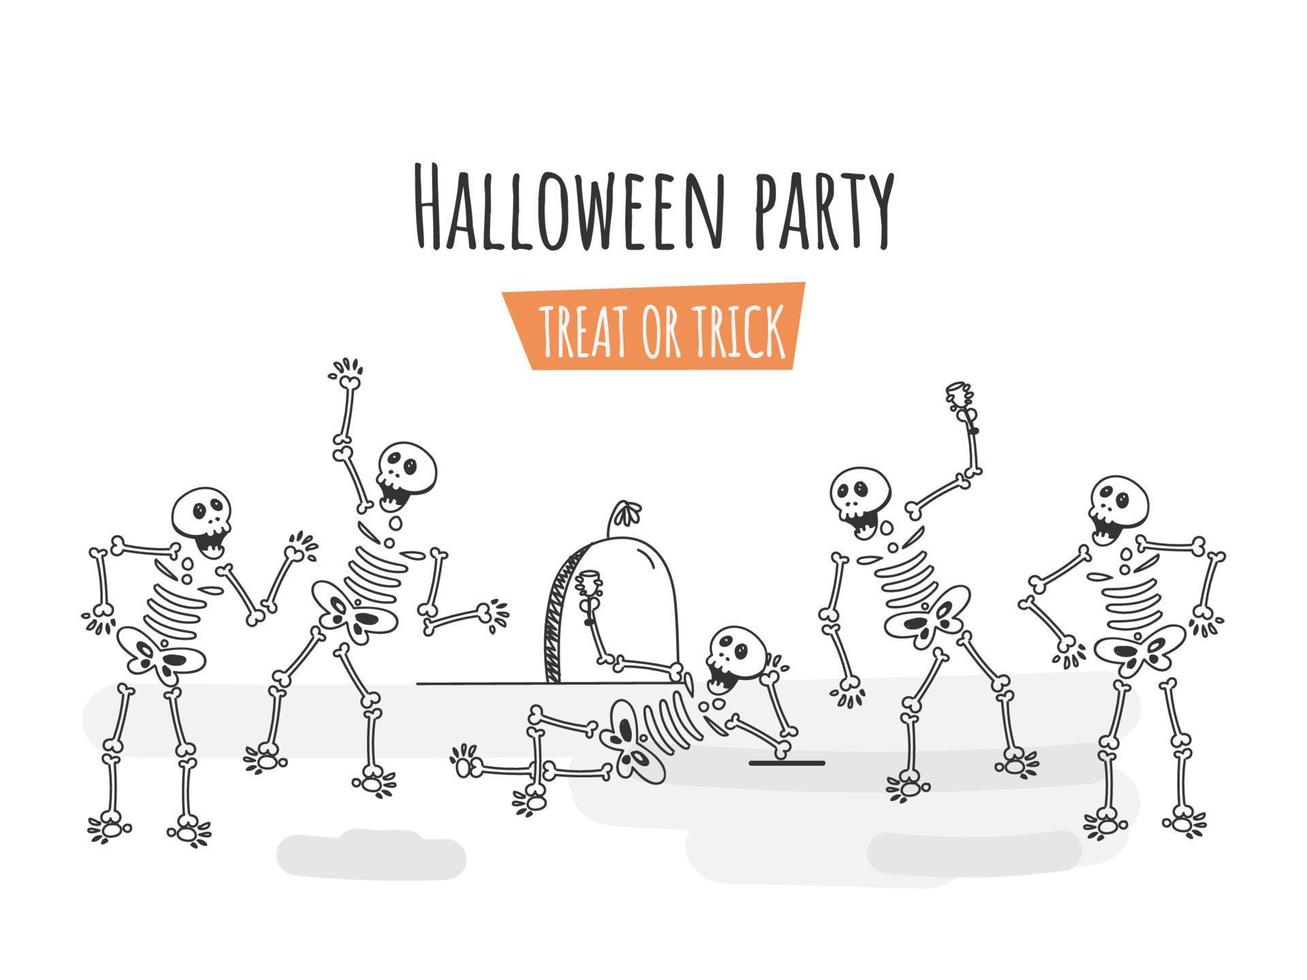 Line Art Illustration of Human Skeletons Dancing or Enjoying with Drink Glass on White Background for Halloween Party, Treat Or Trick. vector